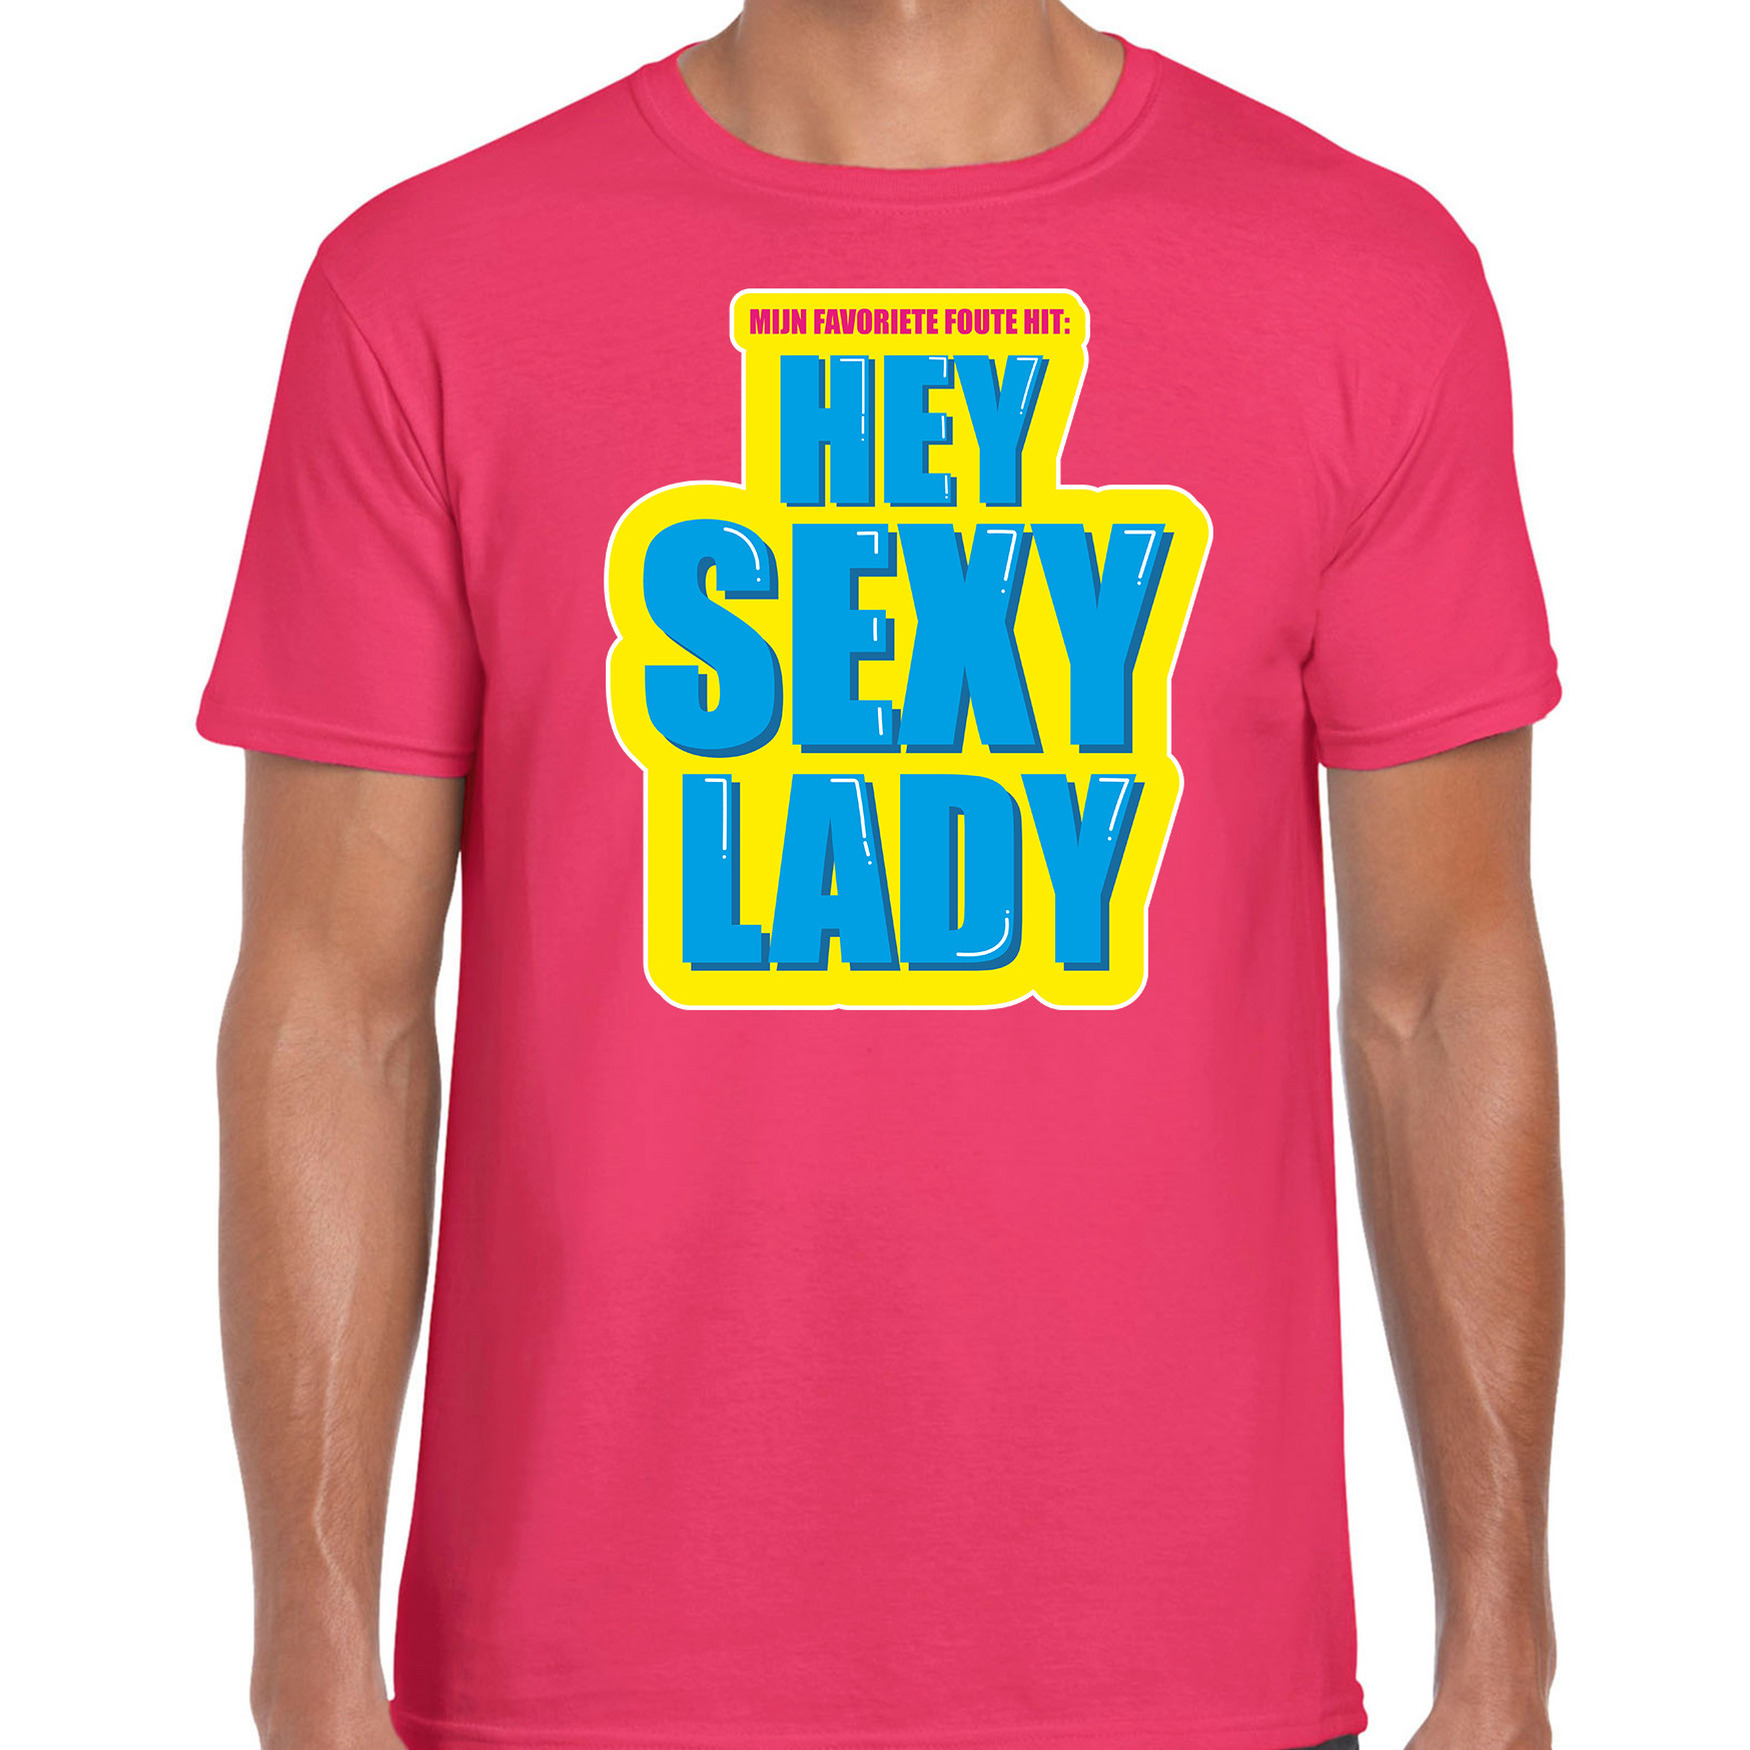 Foute party Hey sexy lady verkleed t-shirt roze heren - Foute party hits outfit/ kleding